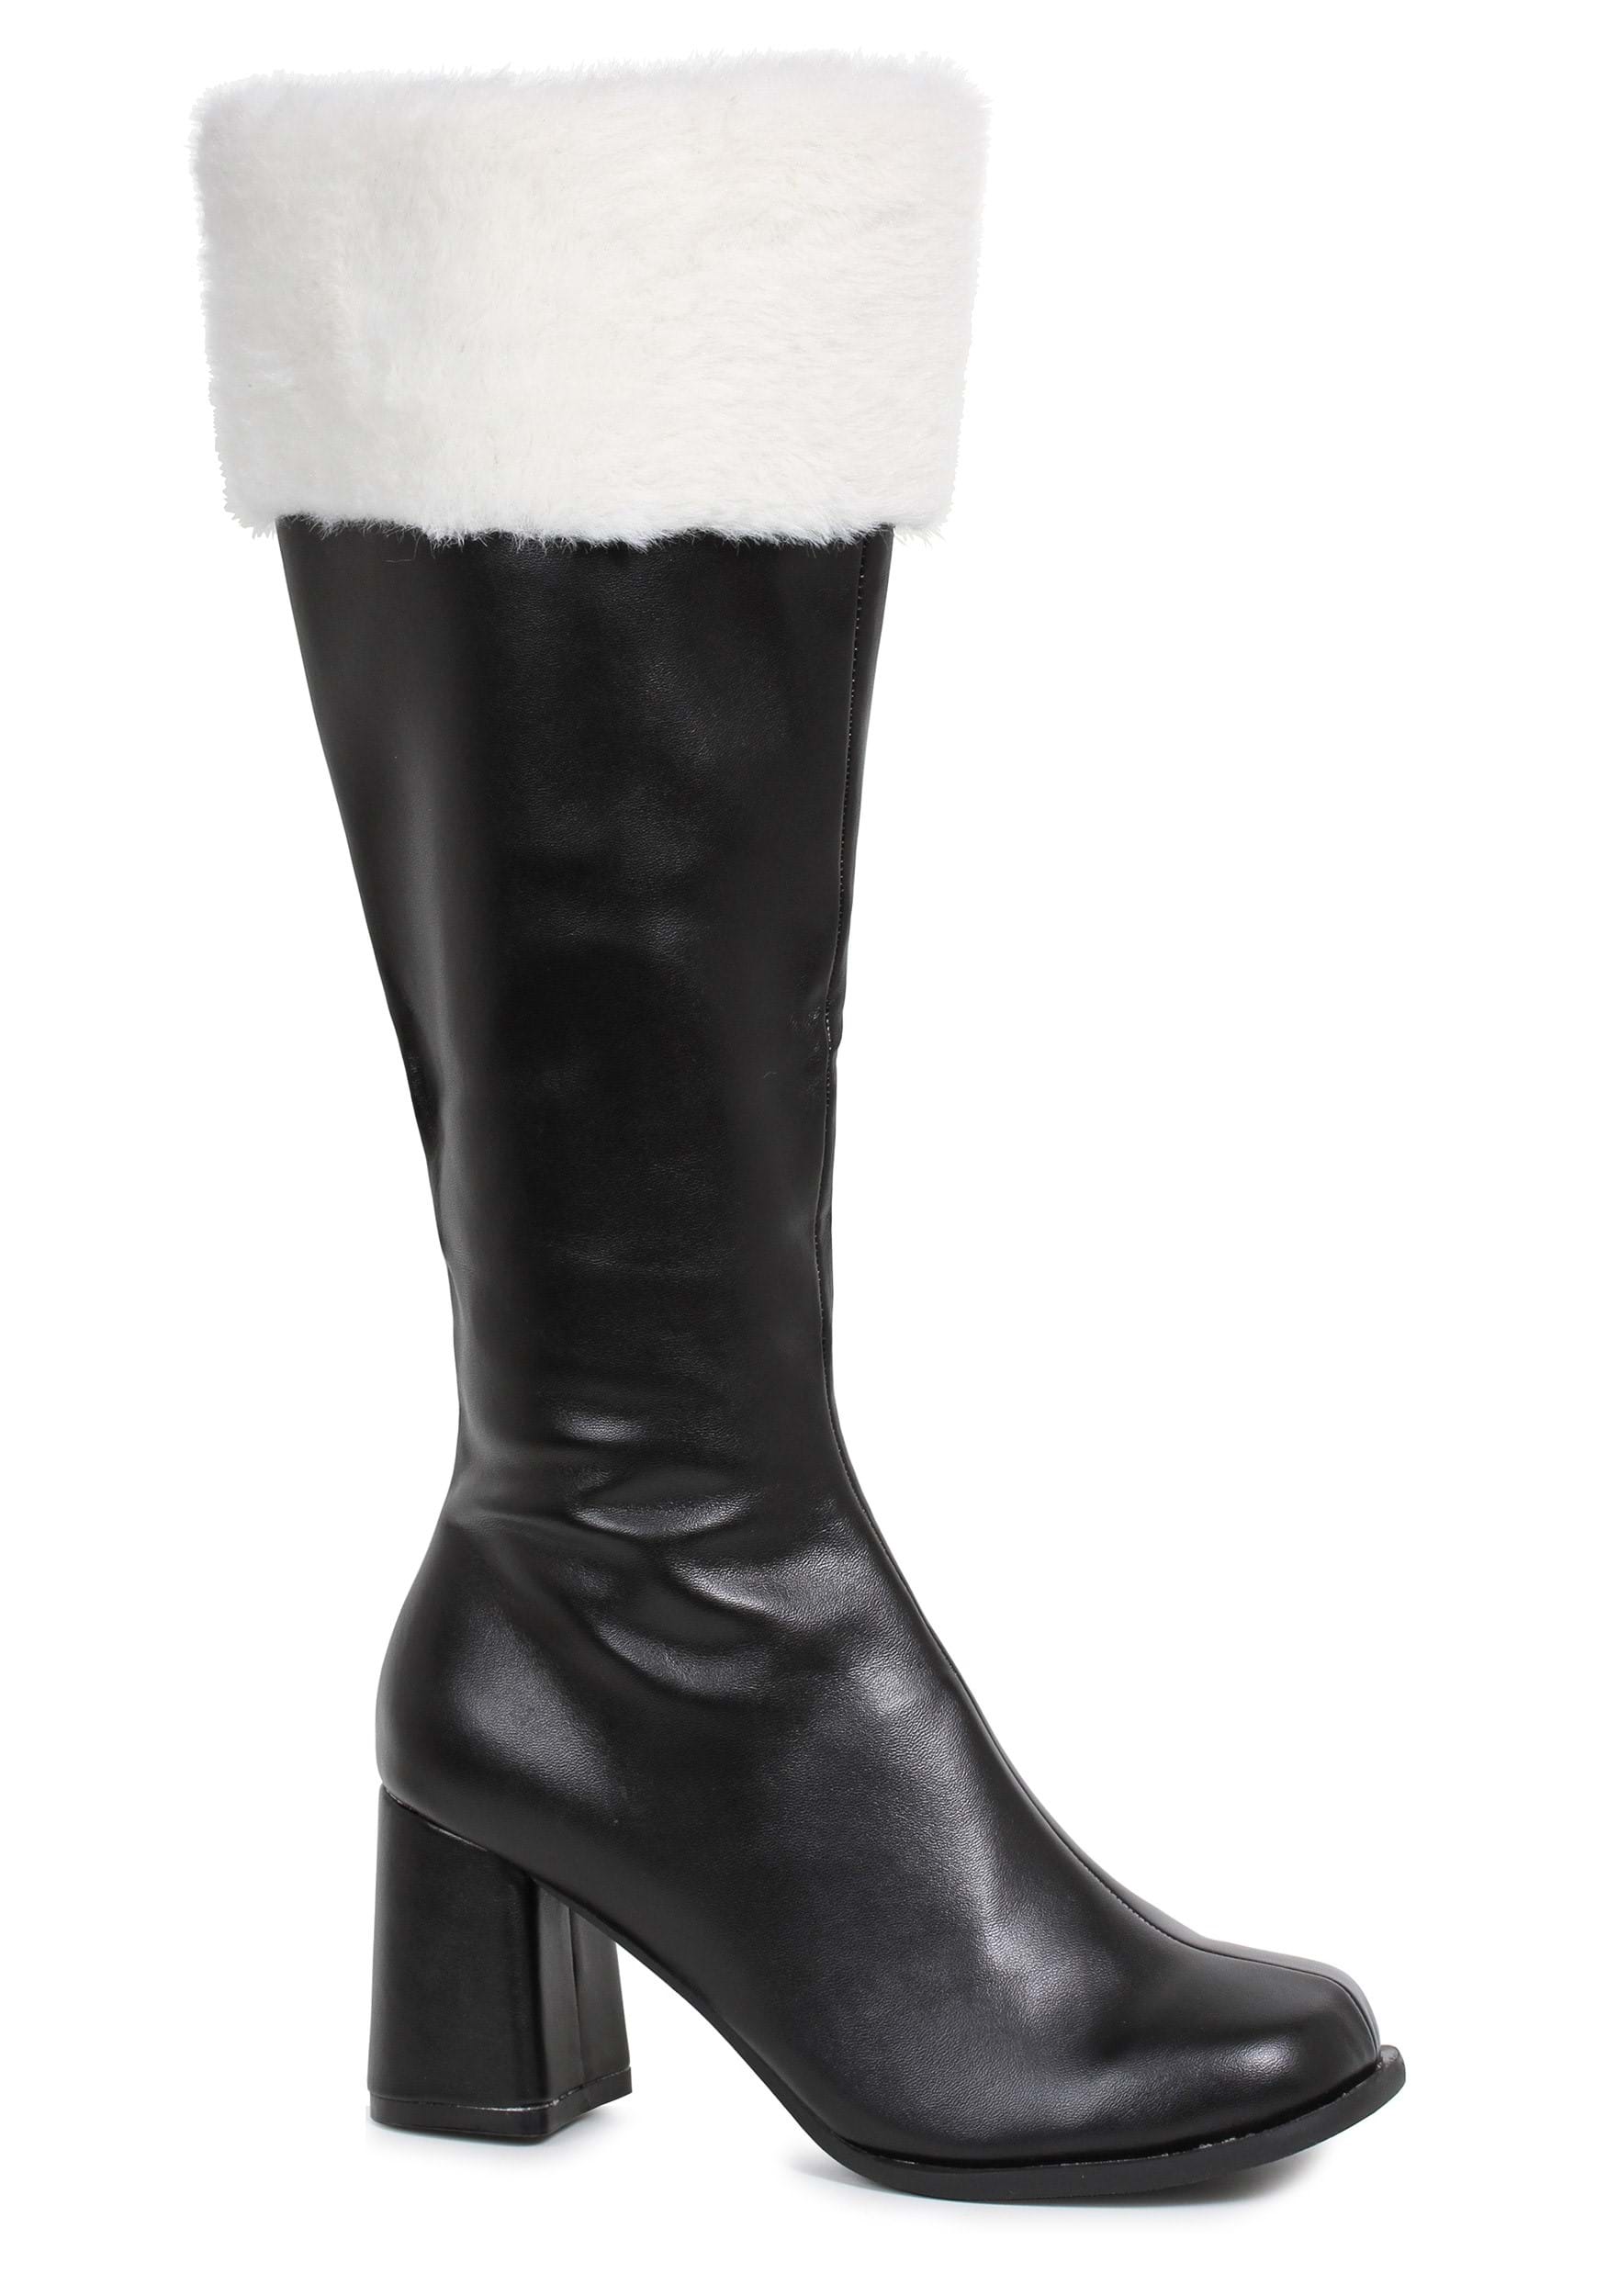 Women’s Gogo Fur Topped Boots